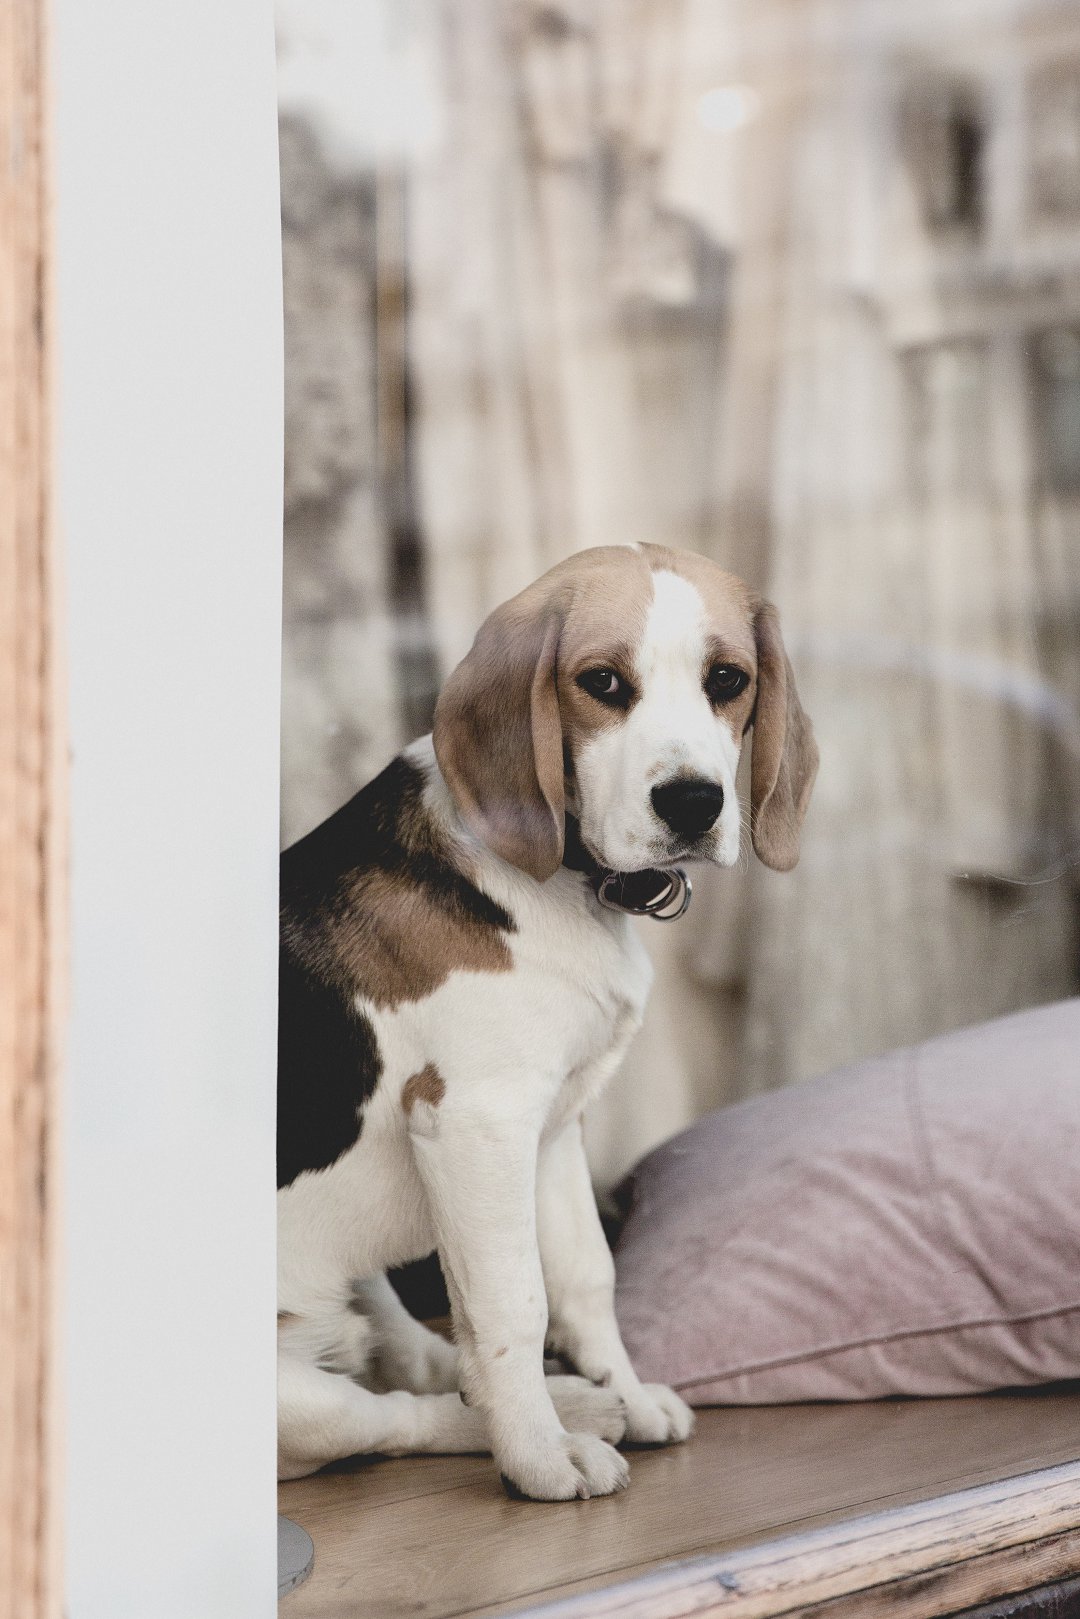 When Will Your Beagle Finally Outgrow Biting? Expert Insights Revealed!